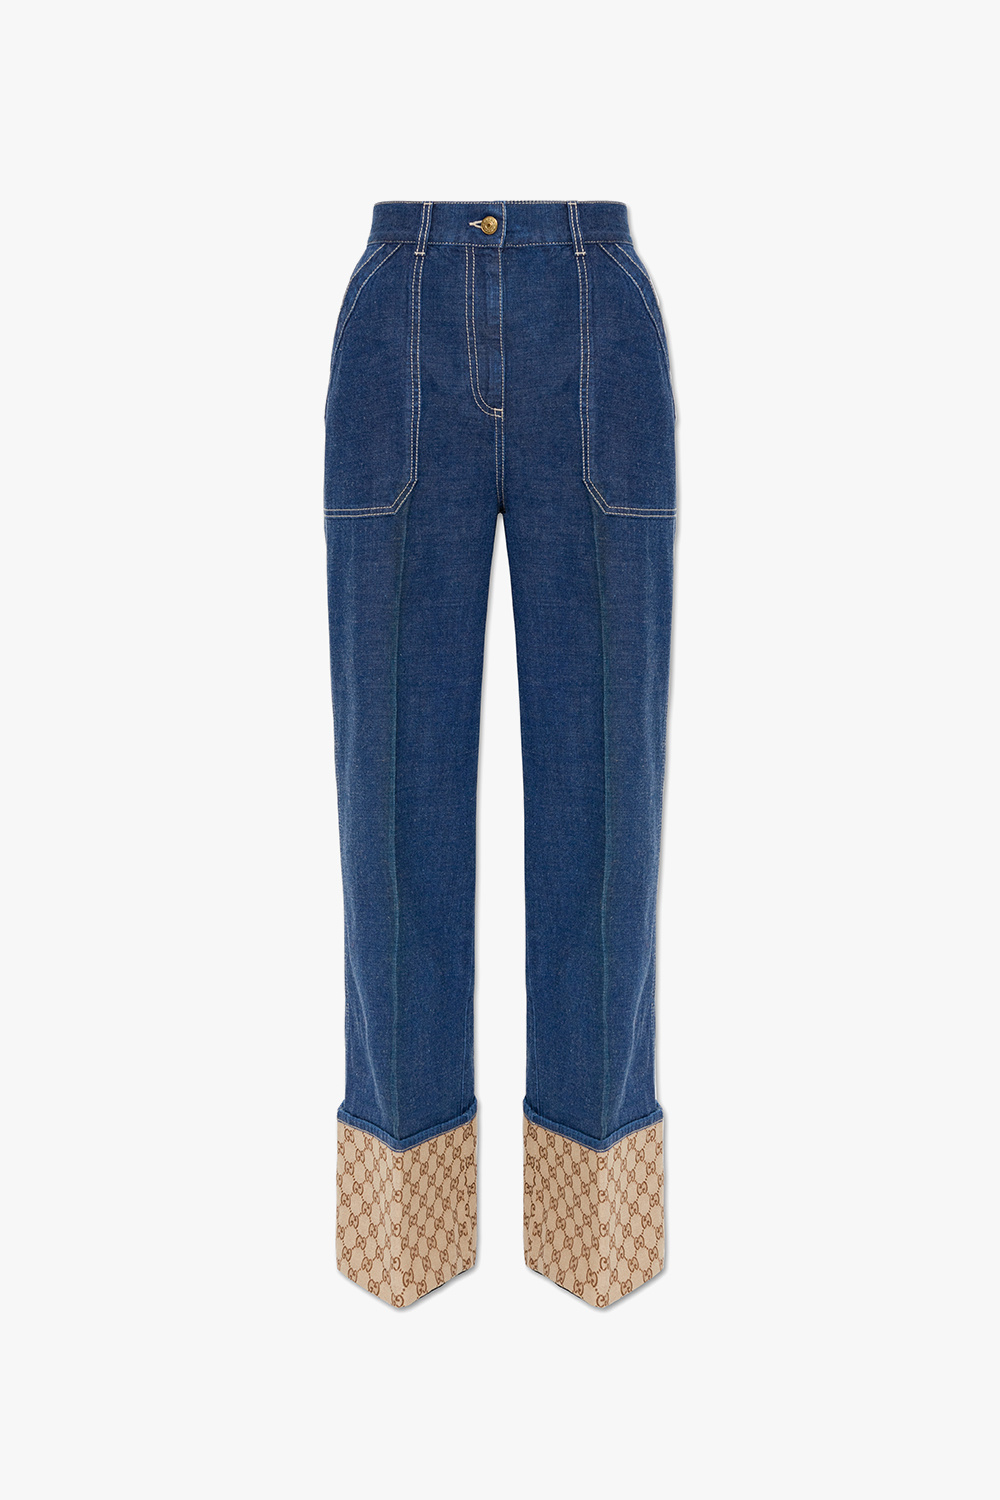 Gucci Monogrammed jeans